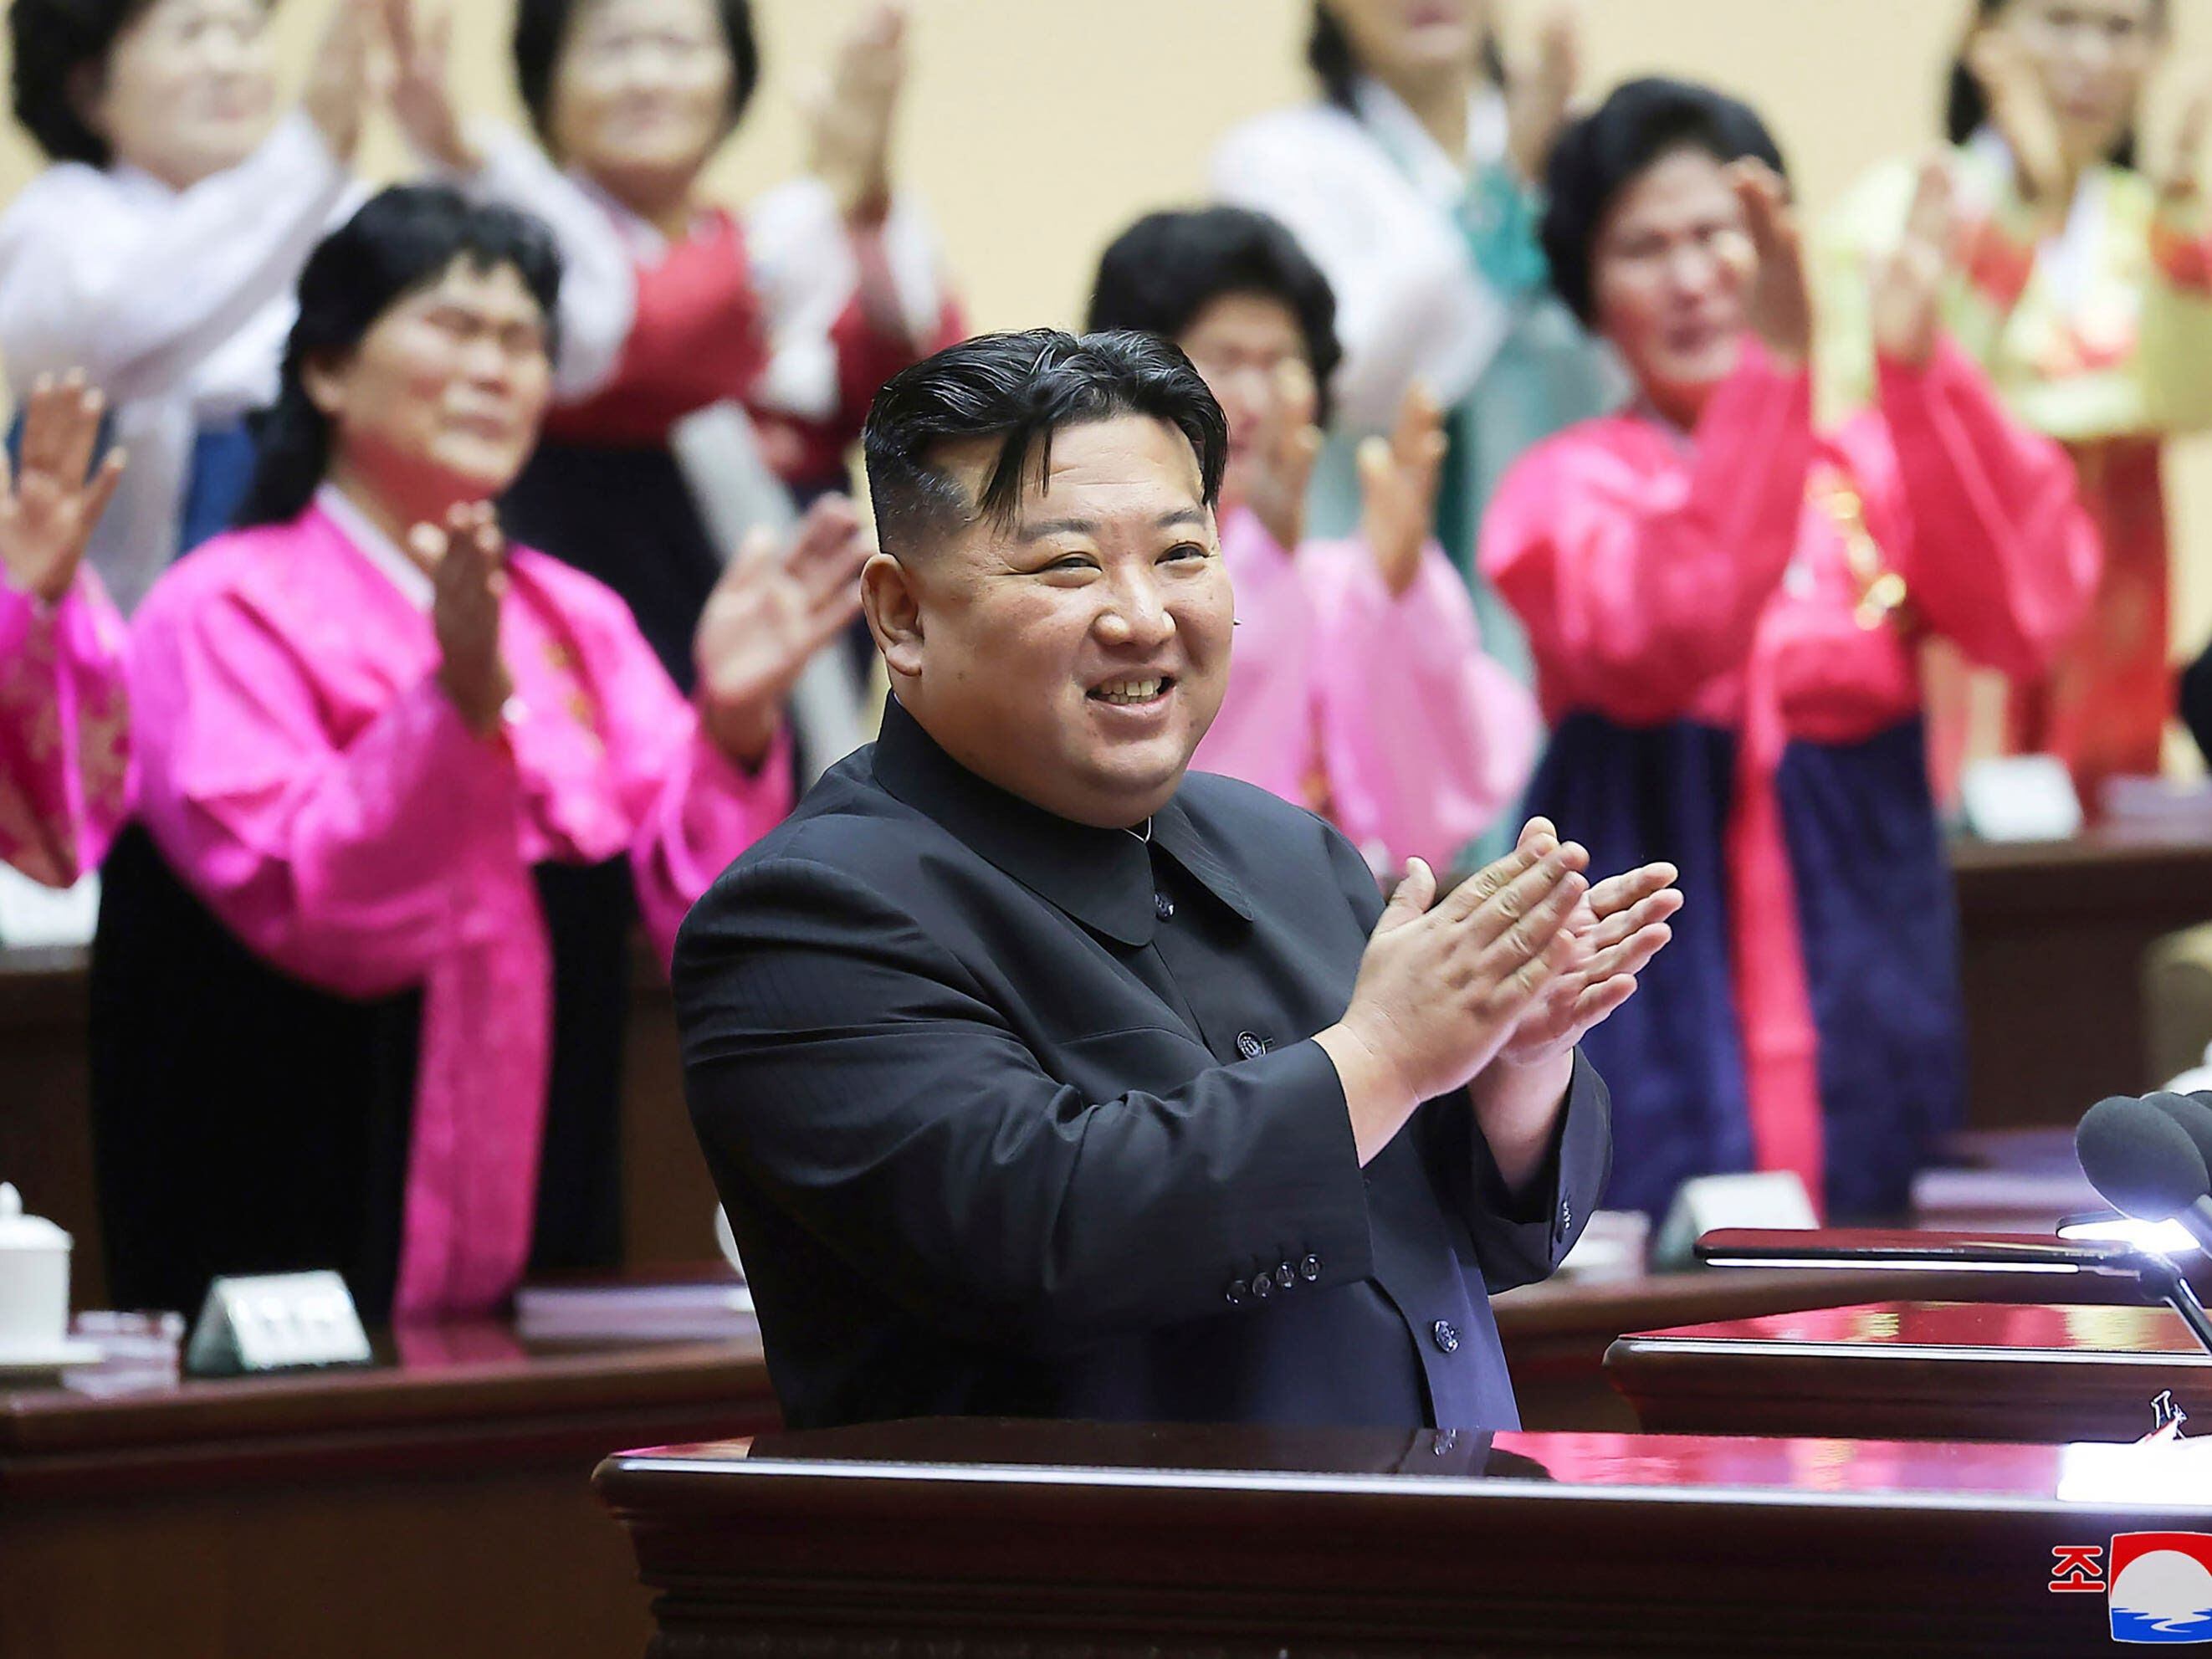 Women’s duty to have more children, says North Korean leader